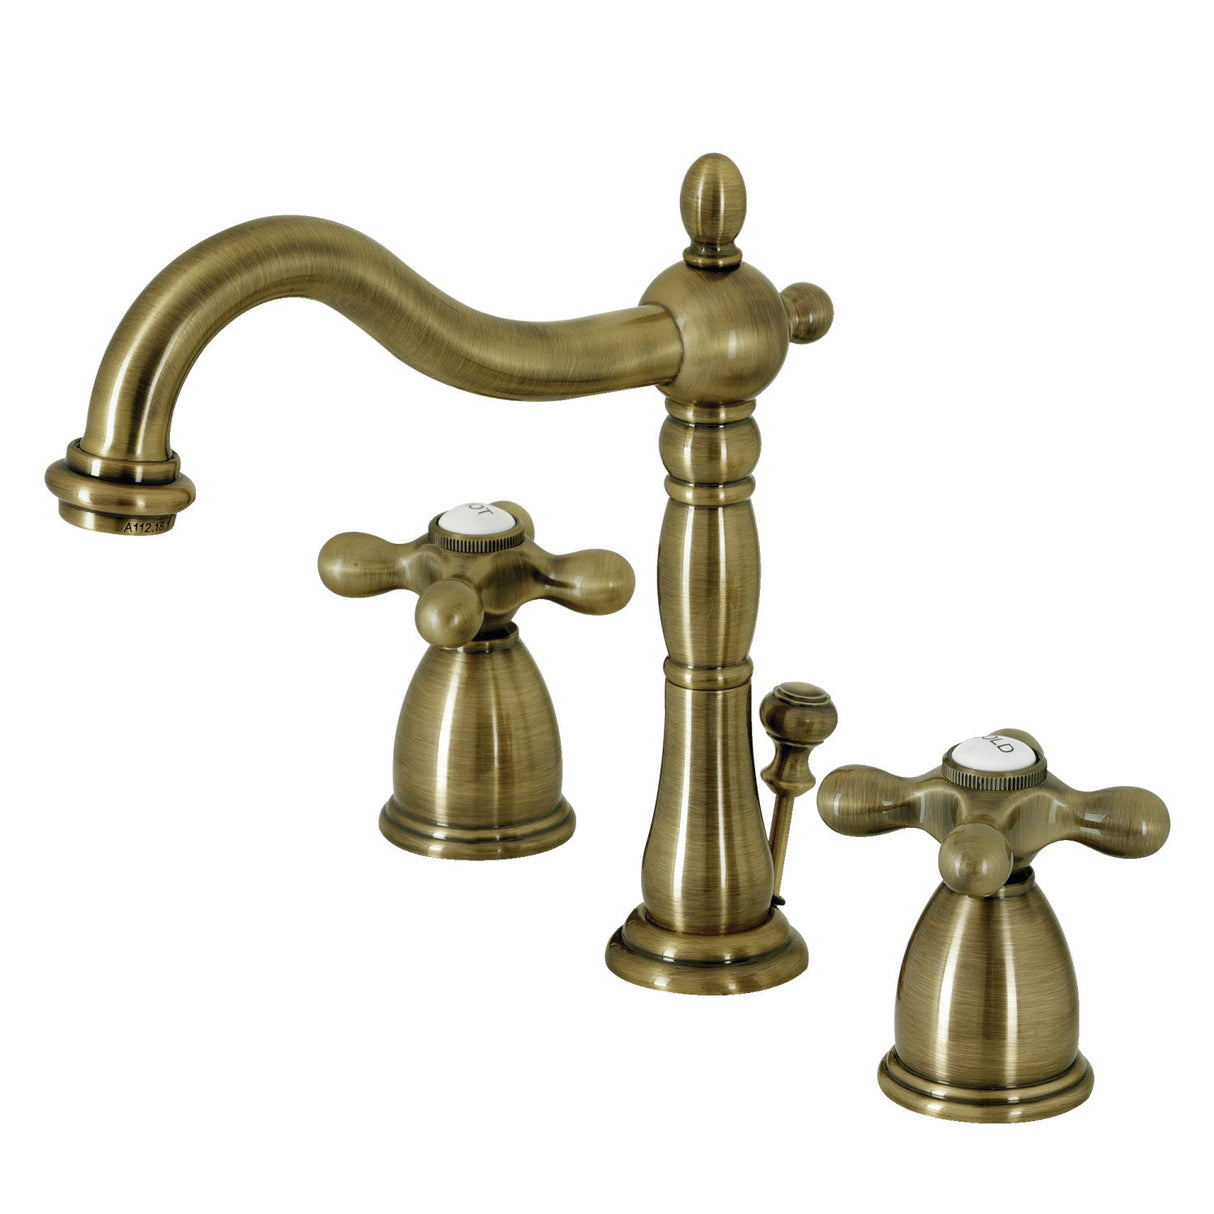 Heritage KB1973AX Two-Handle 3-Hole Deck Mount Widespread Bathroom Faucet with Brass Pop-Up, Antique Brass